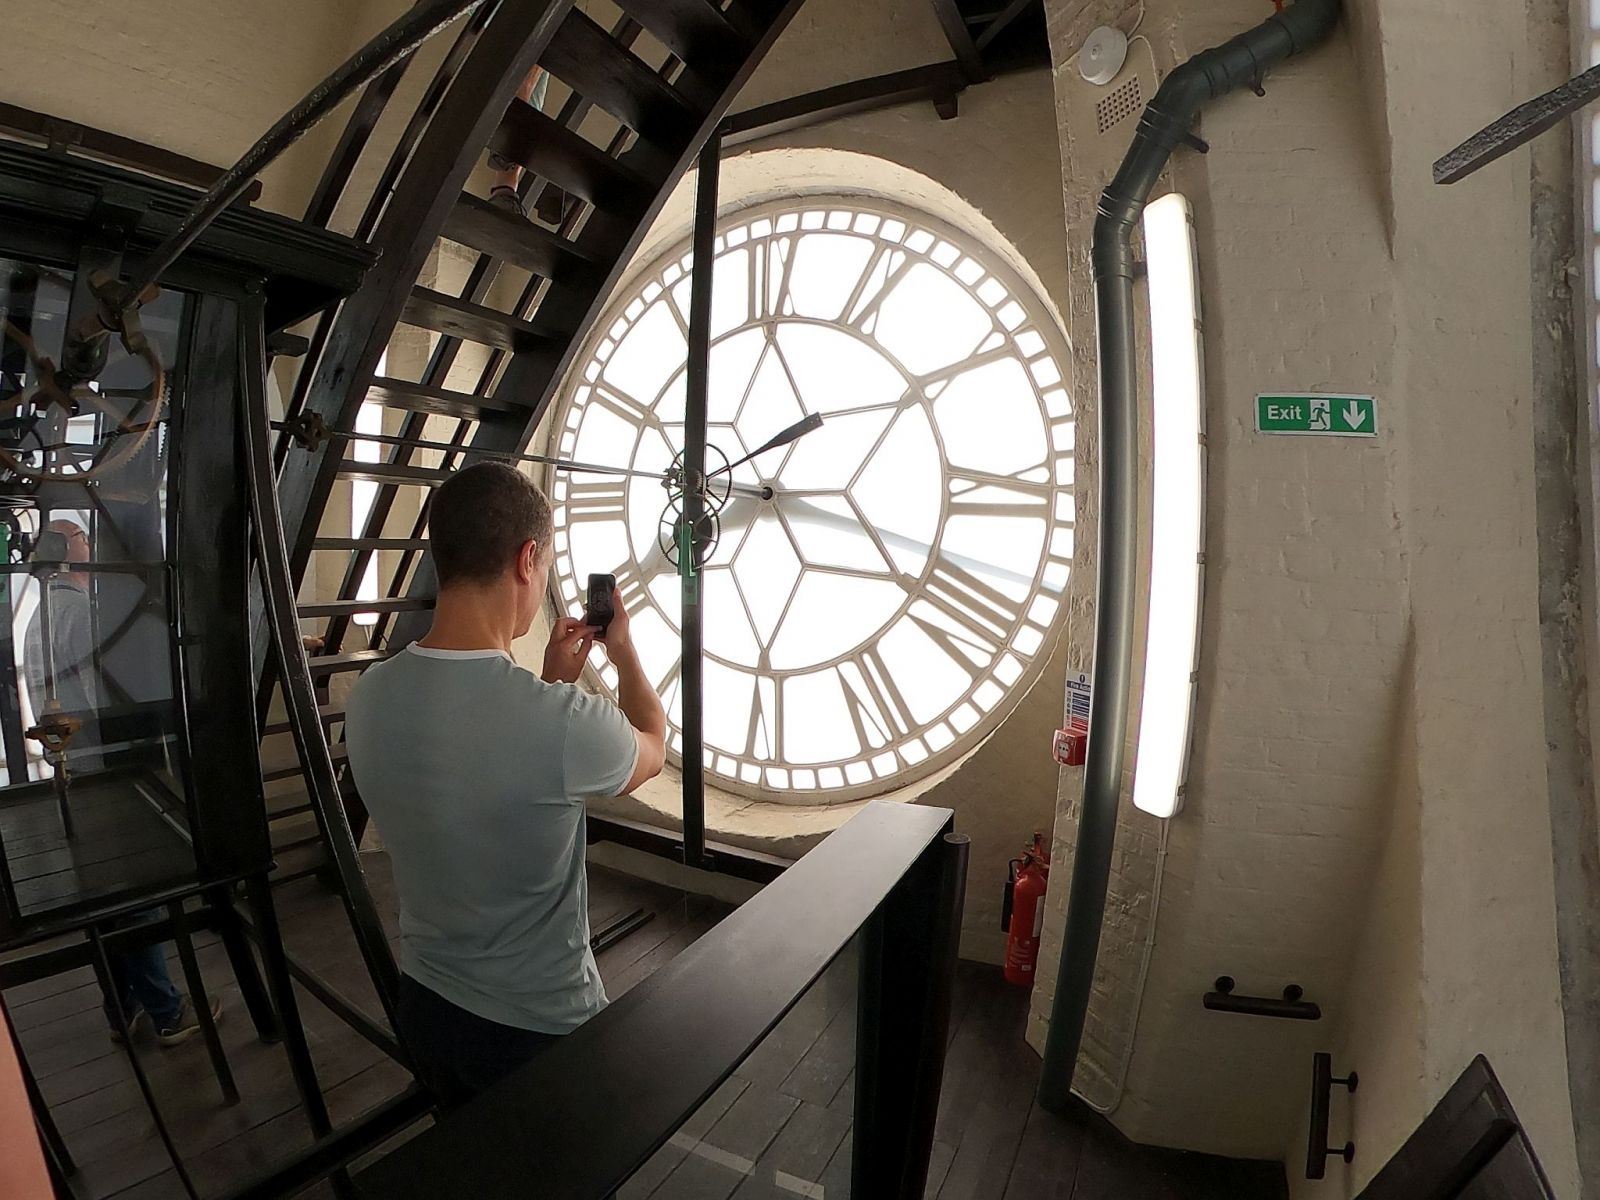 Inside the clock face of the Caledonian Park Clock Tower